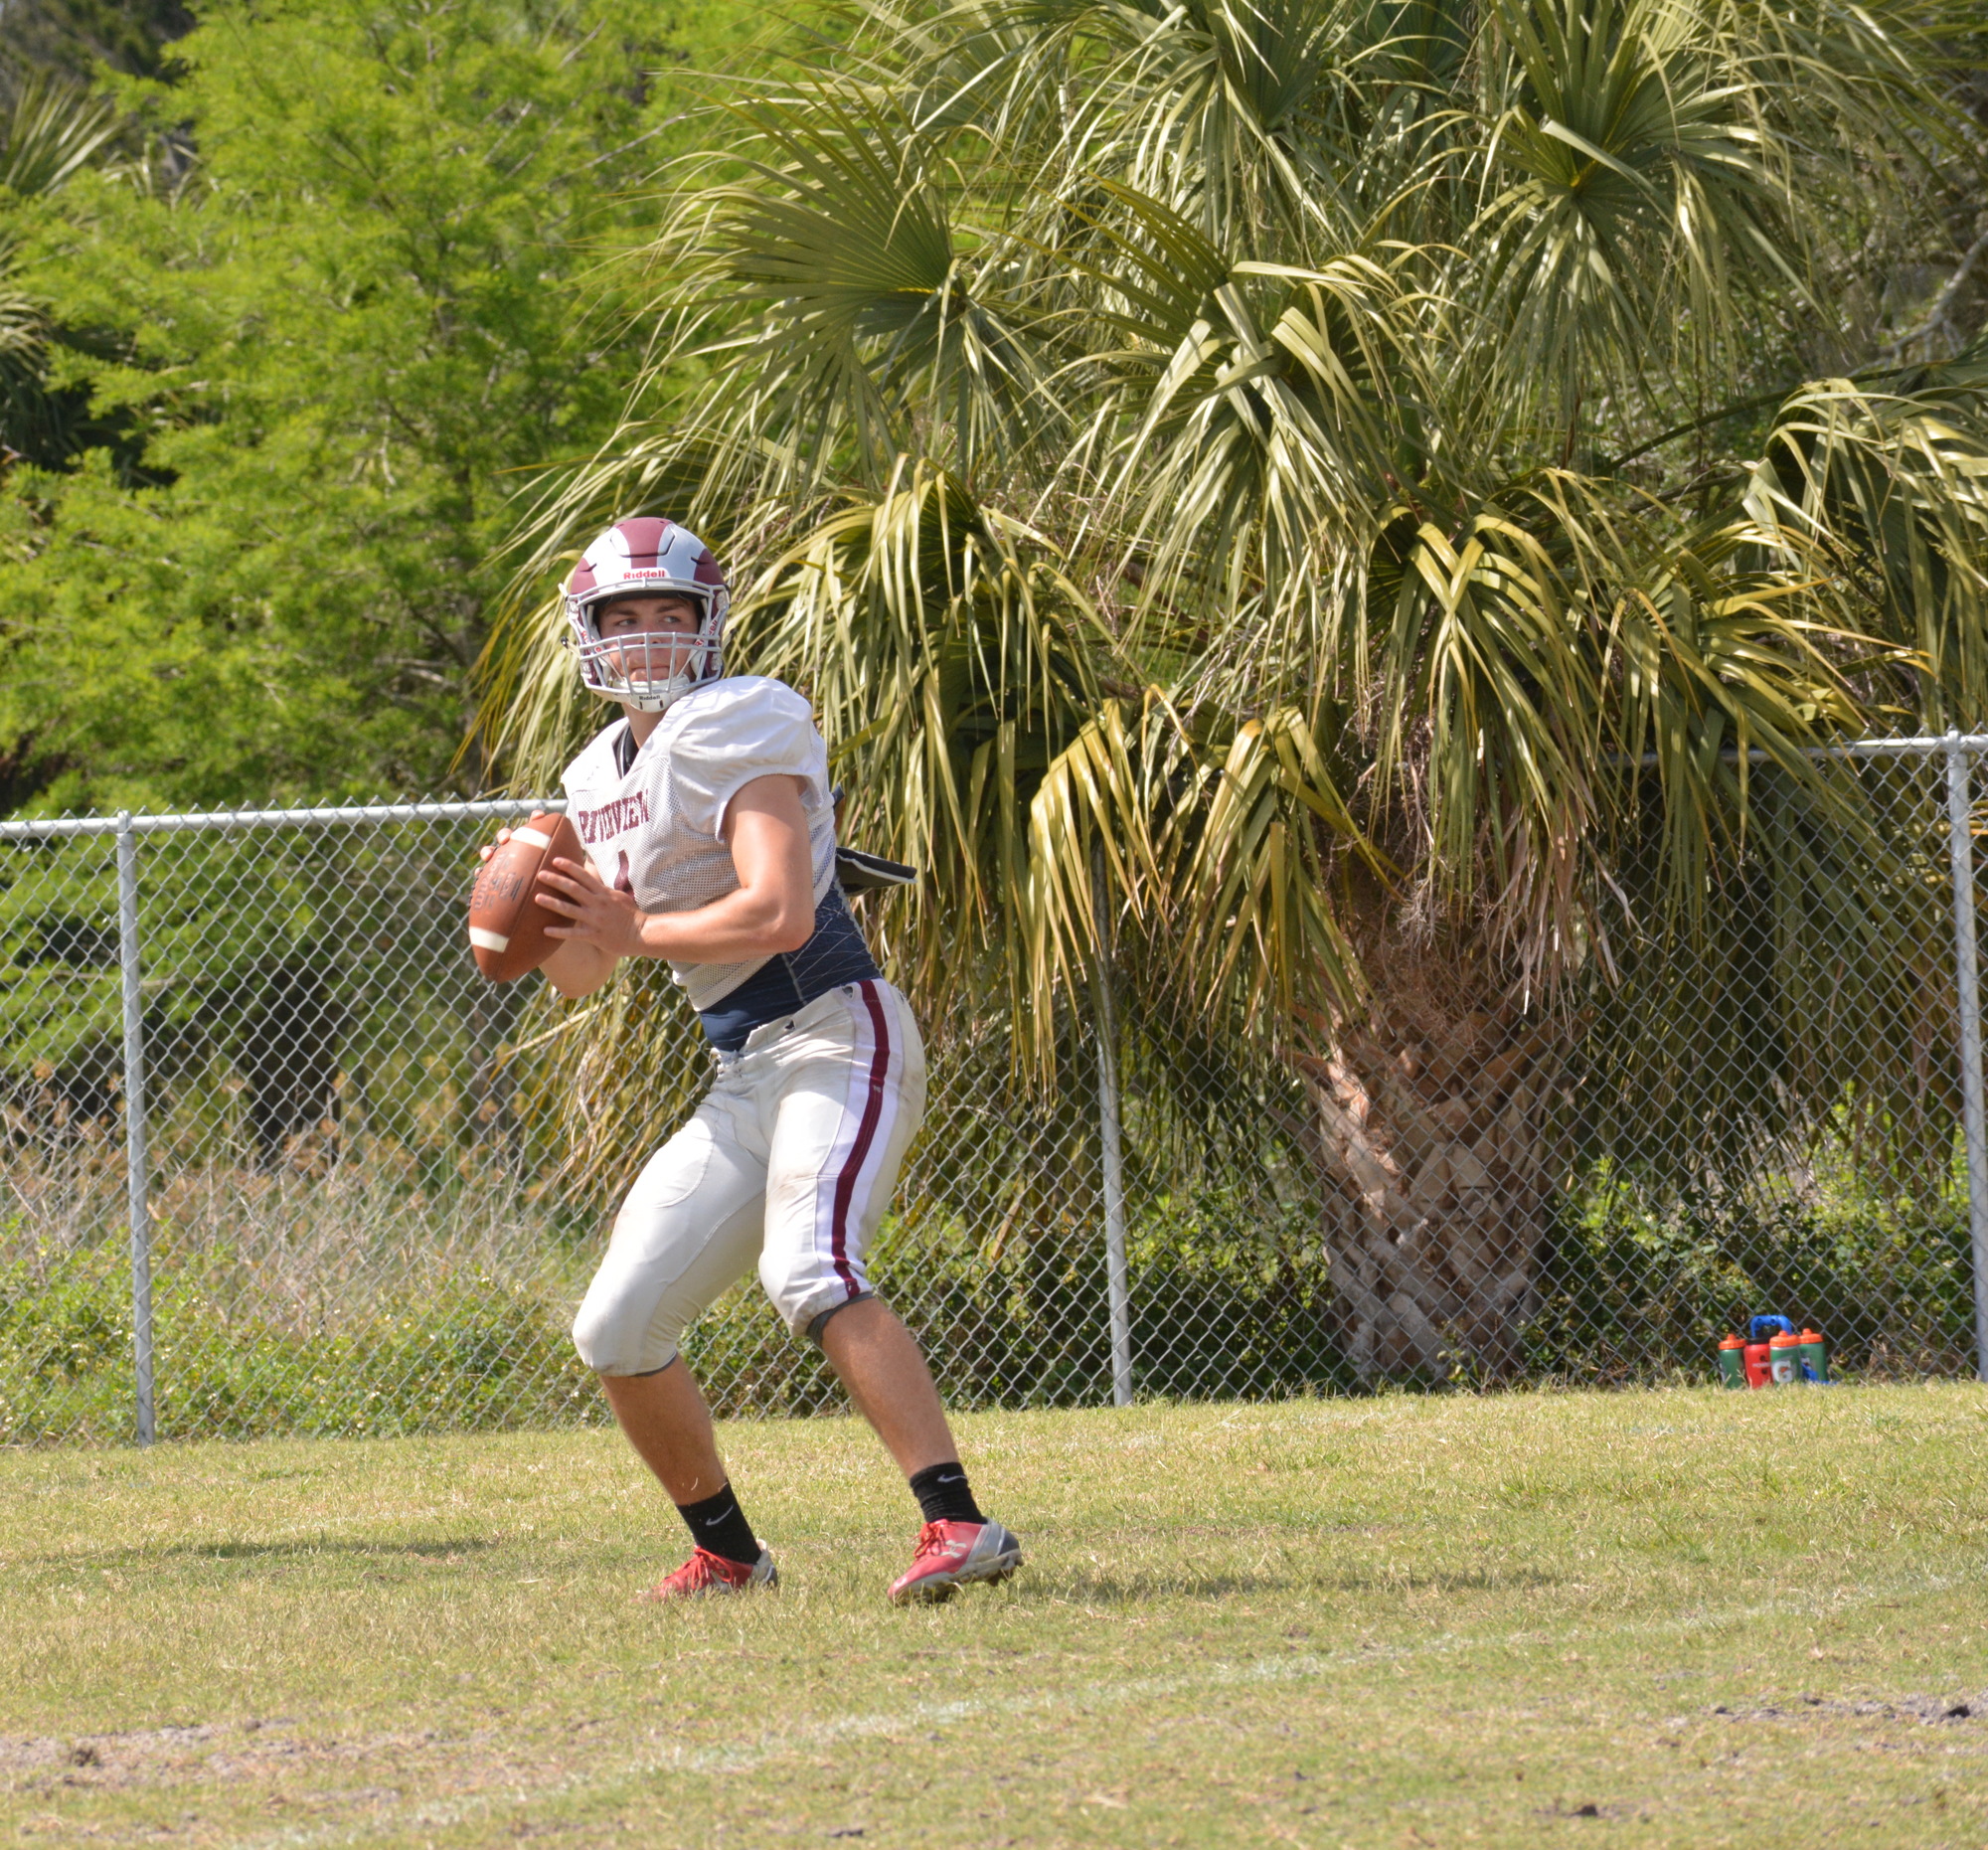 Riverview quarterback Shaun White launches a pass in spring practice.